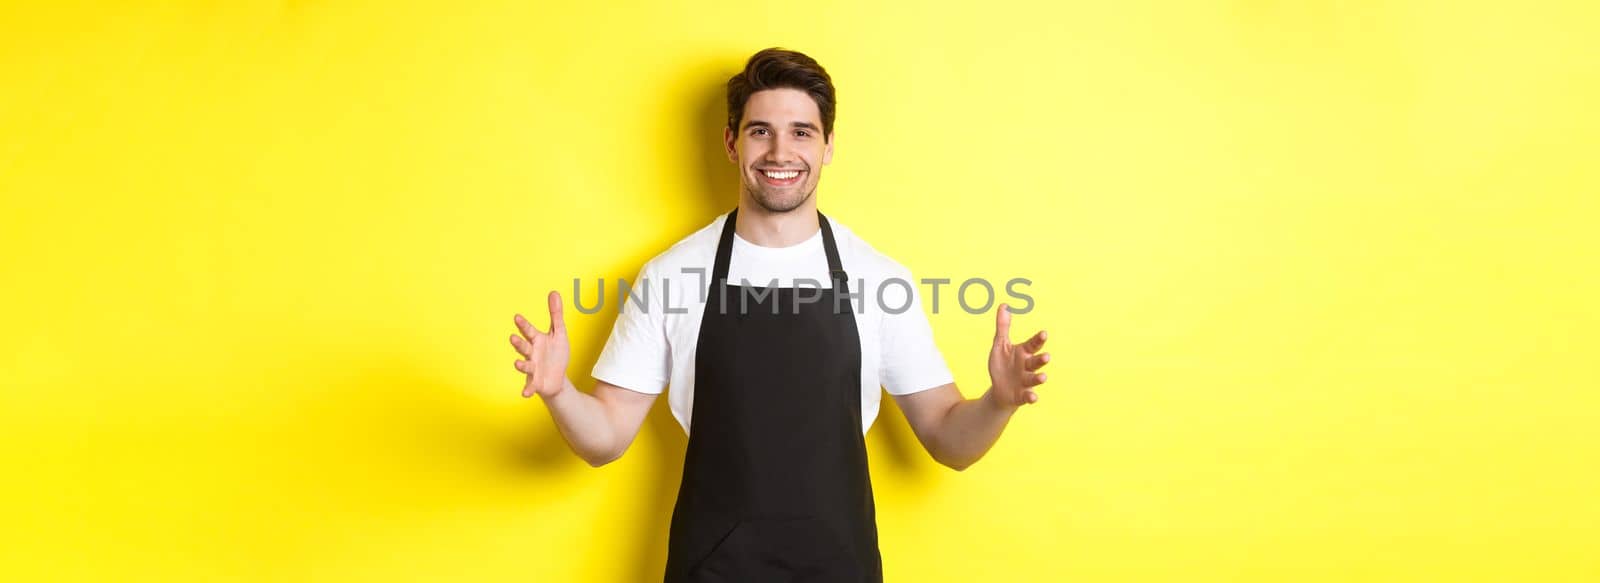 Smiling waiter in black apron holding your logo or box, spread hands as if carry something large, standing over yellow background.